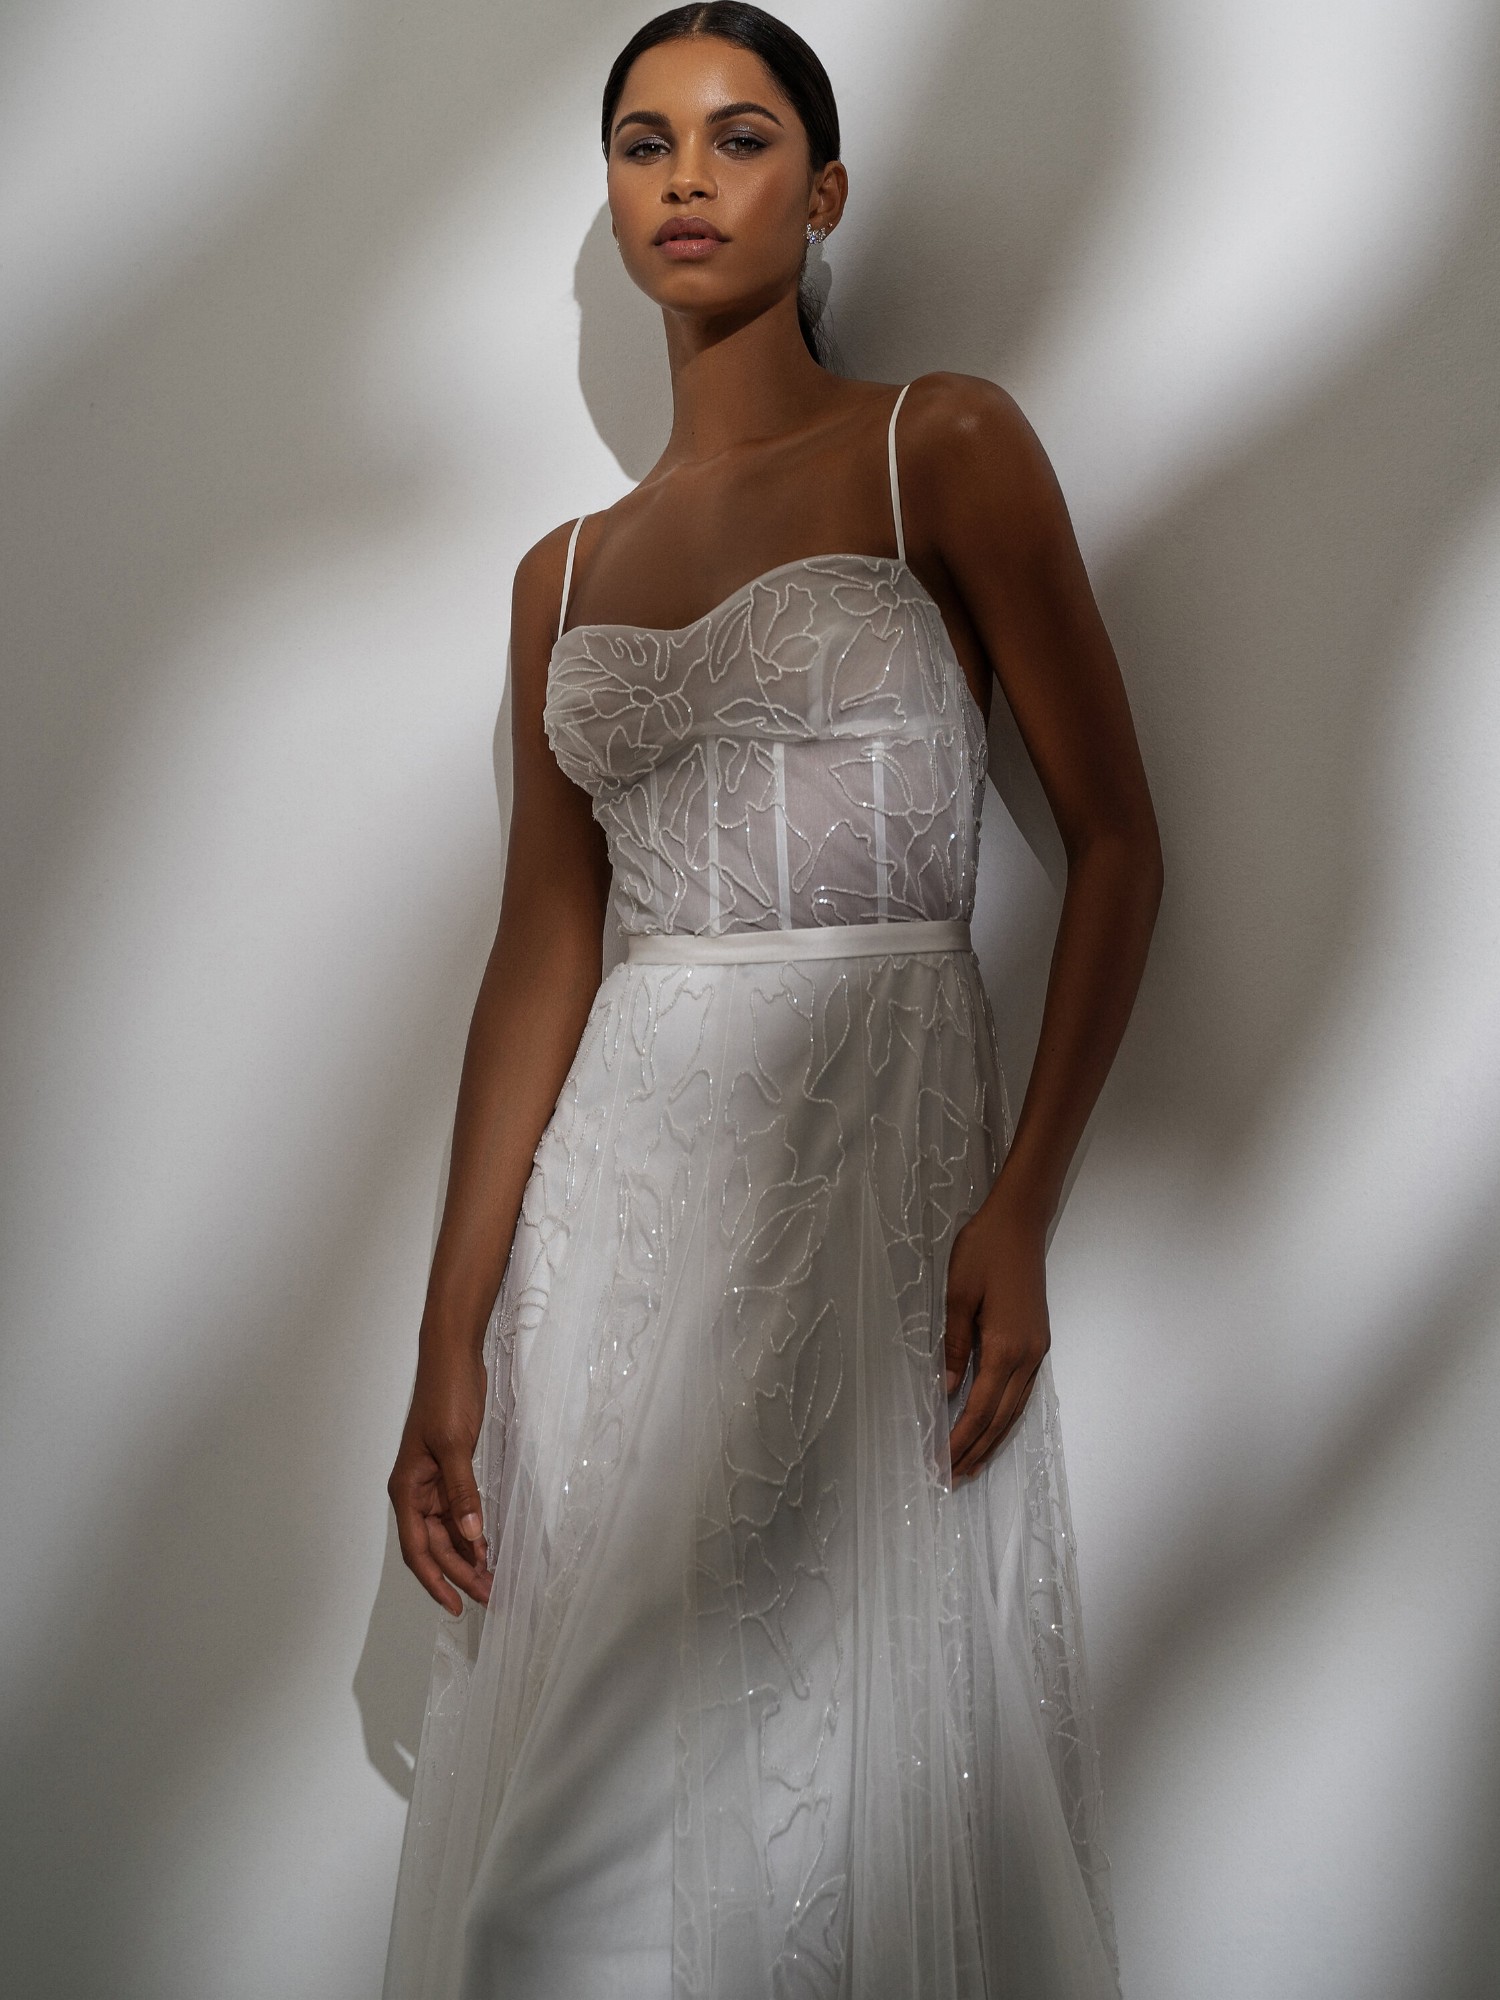 Amaryllis Gown Inspirated By Botanica of Alexandra Grecco 2021 Bridal Collection